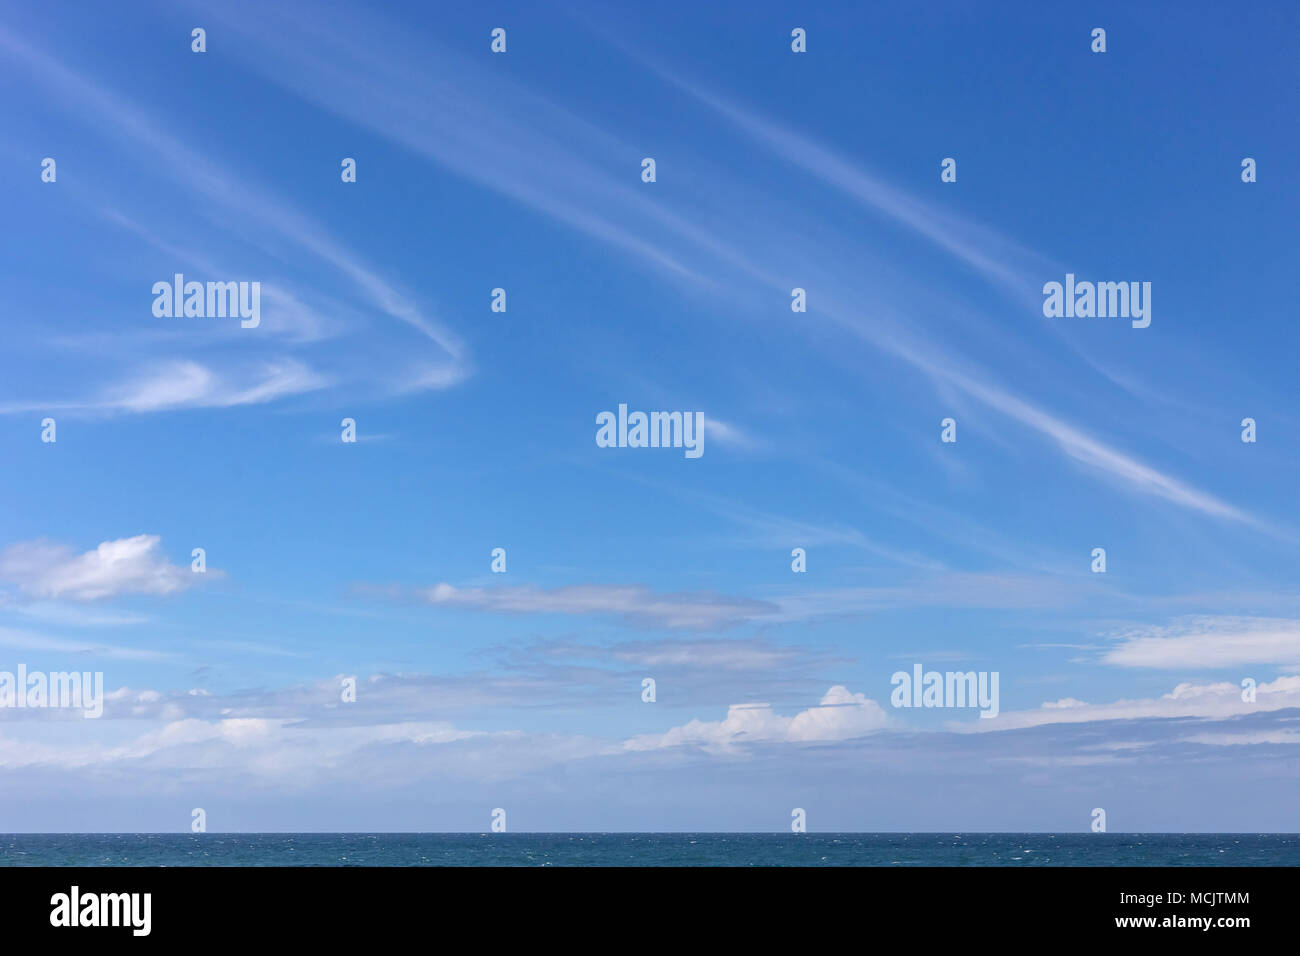 Cirrus clouds in the sky, far out to sea in Durban, South Africa. Stock Photo